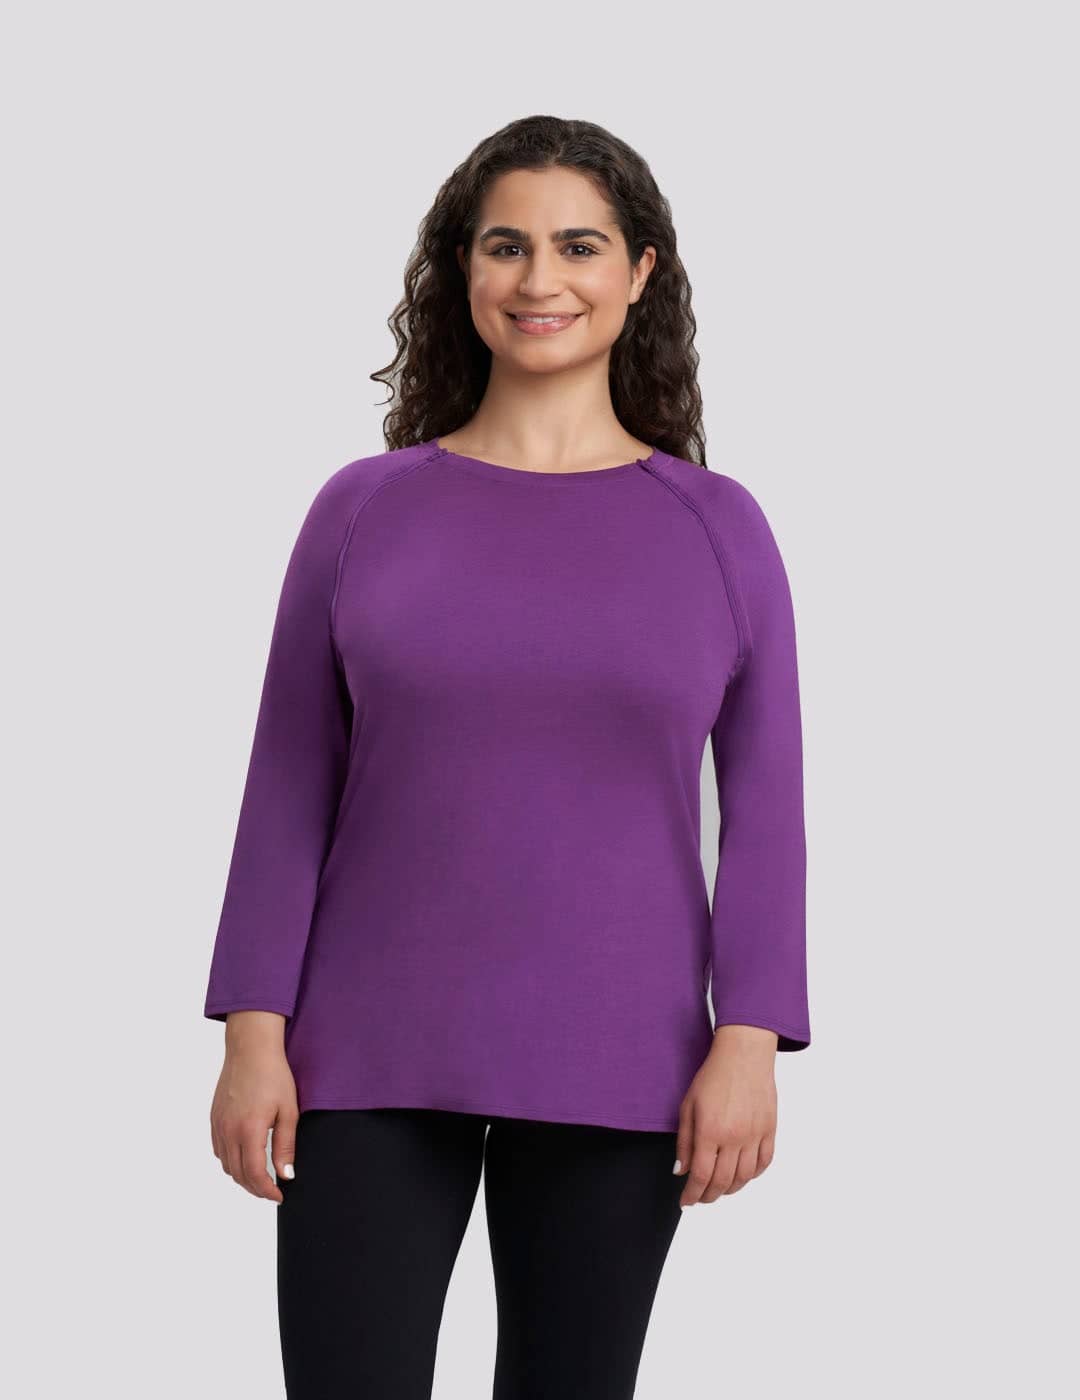 Womens Chest Port Access Plum Infusion Top